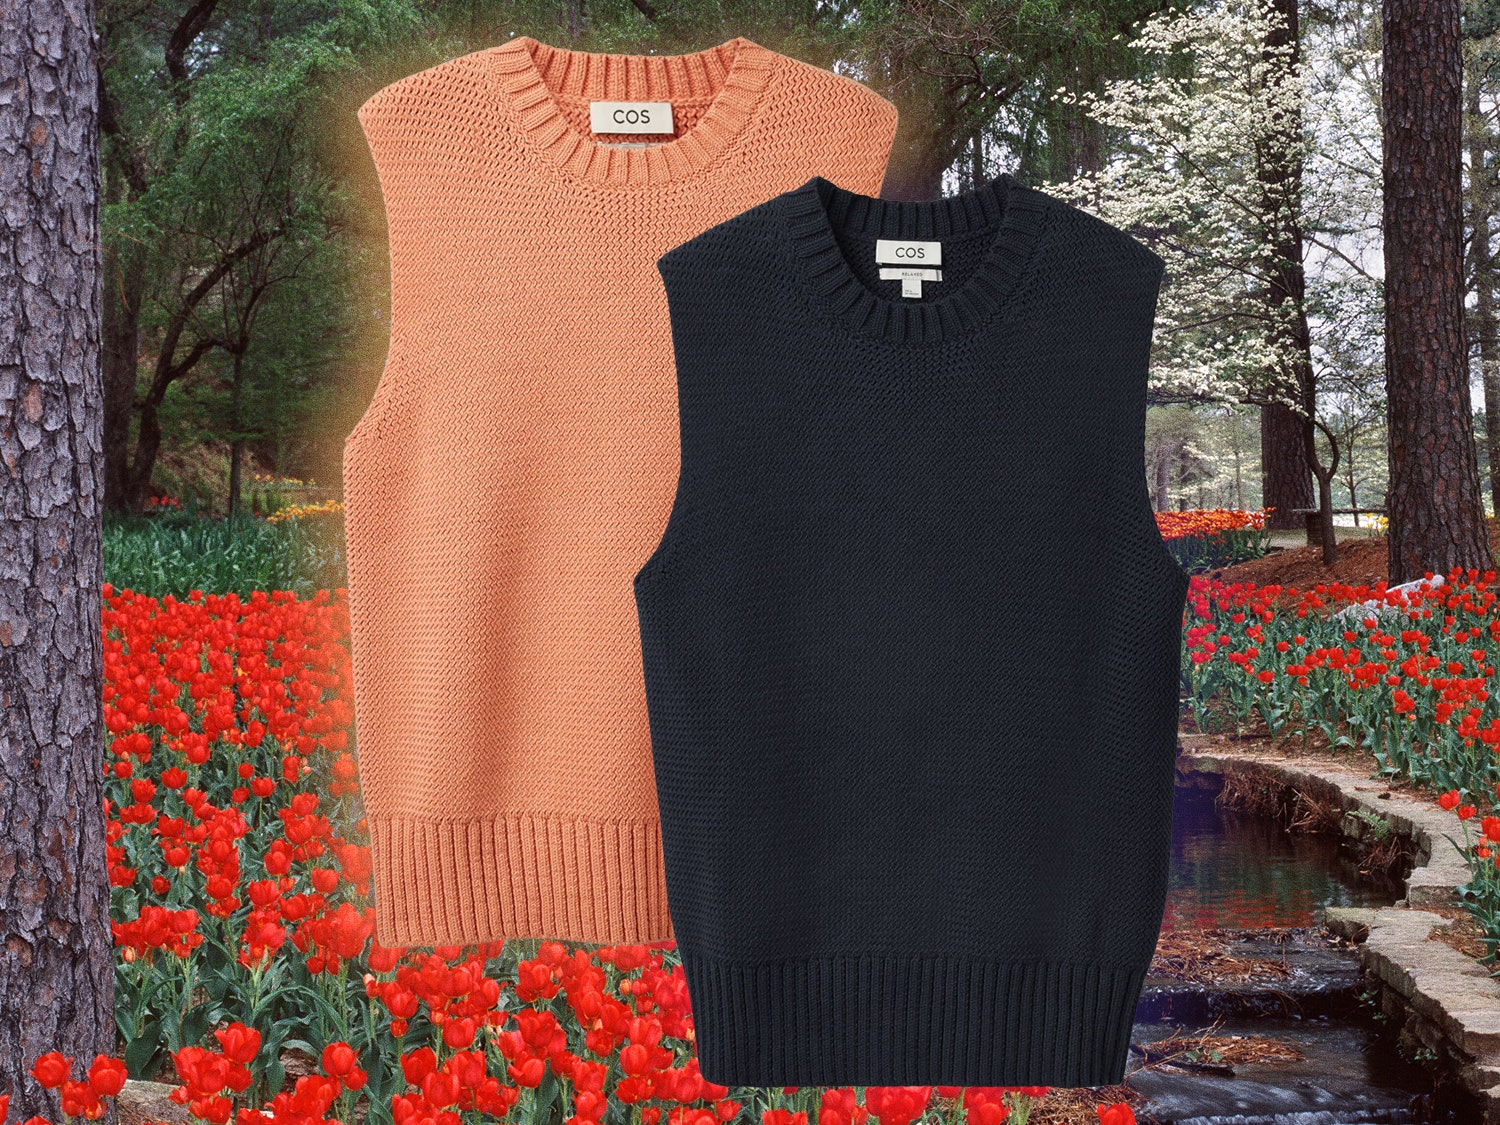 This £55 Cos sweater vest is the must-have springtime layer you didn't know you needed